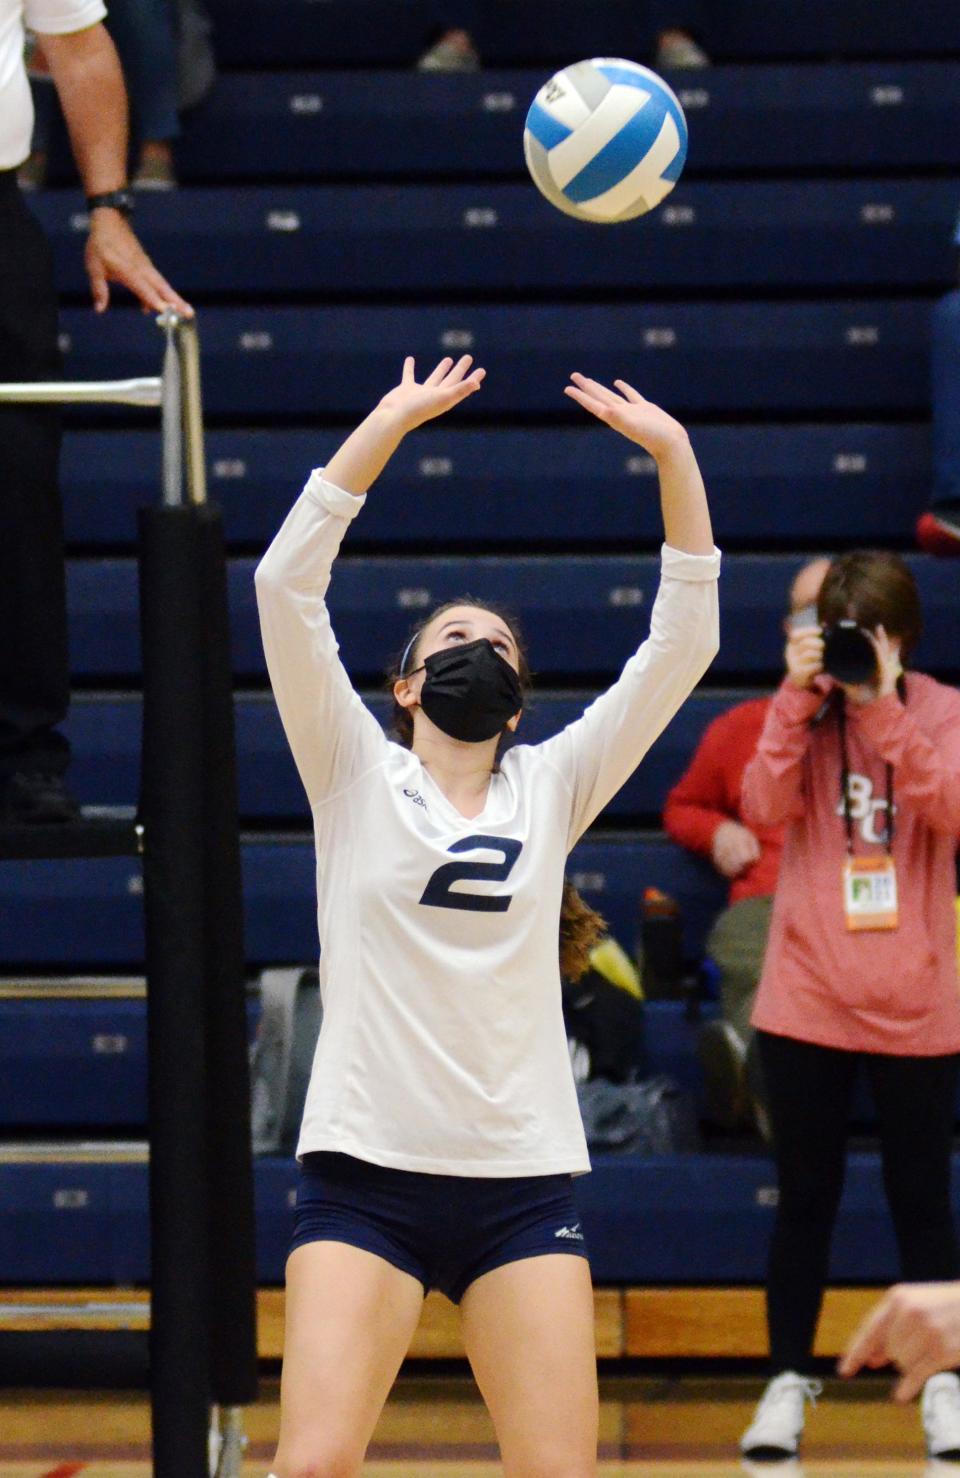 Ava Tarsi and the Boyne City volleyball team will get things going later this week in Pellston's annual hosted tournament.